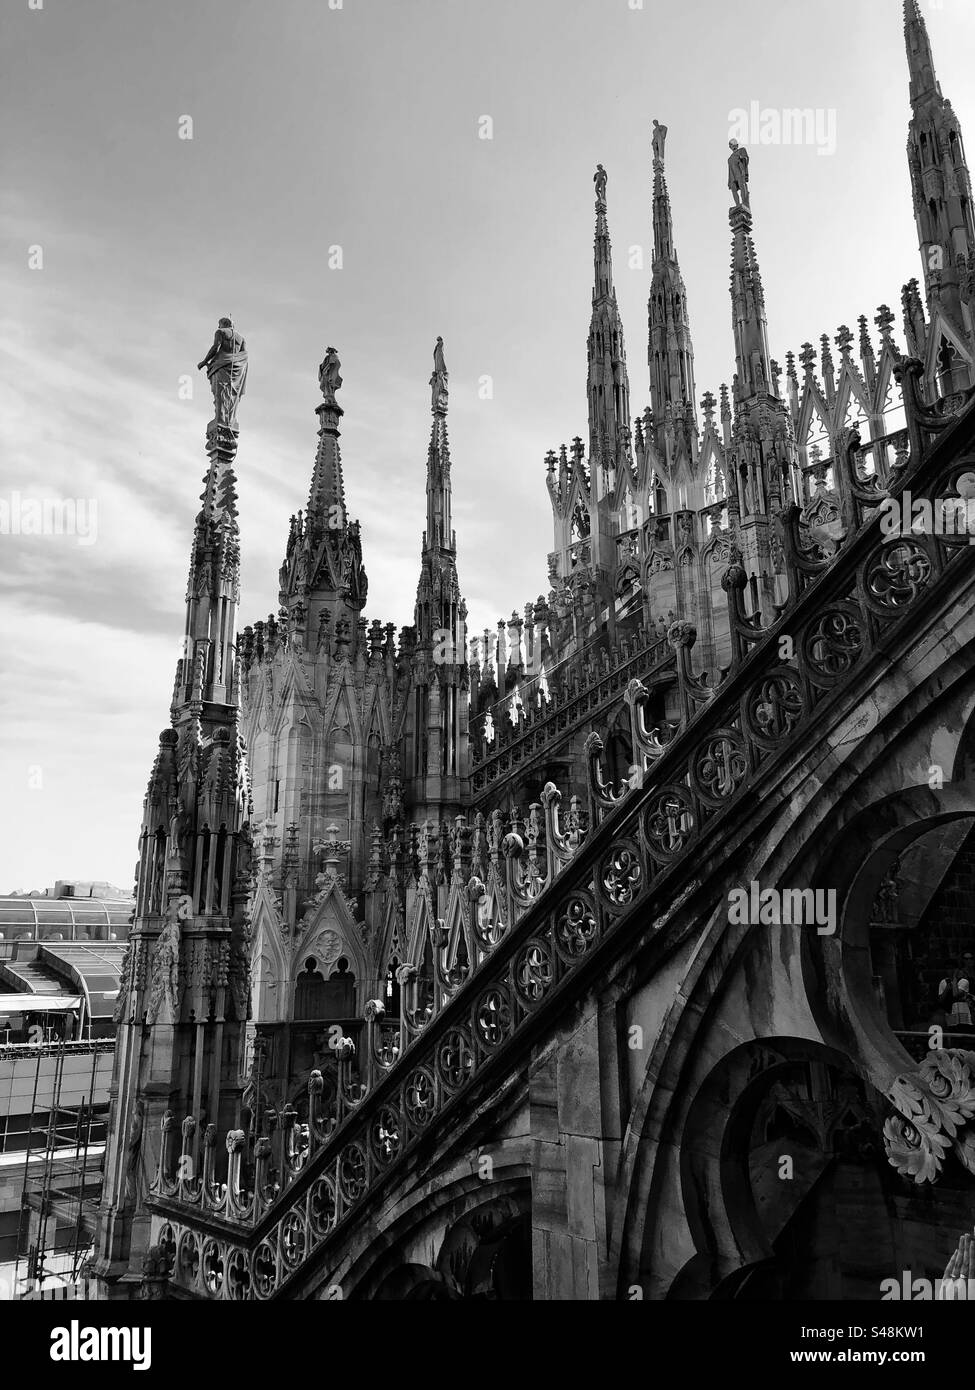 Milan cathedral Black and White Stock Photos & Images - Alamy